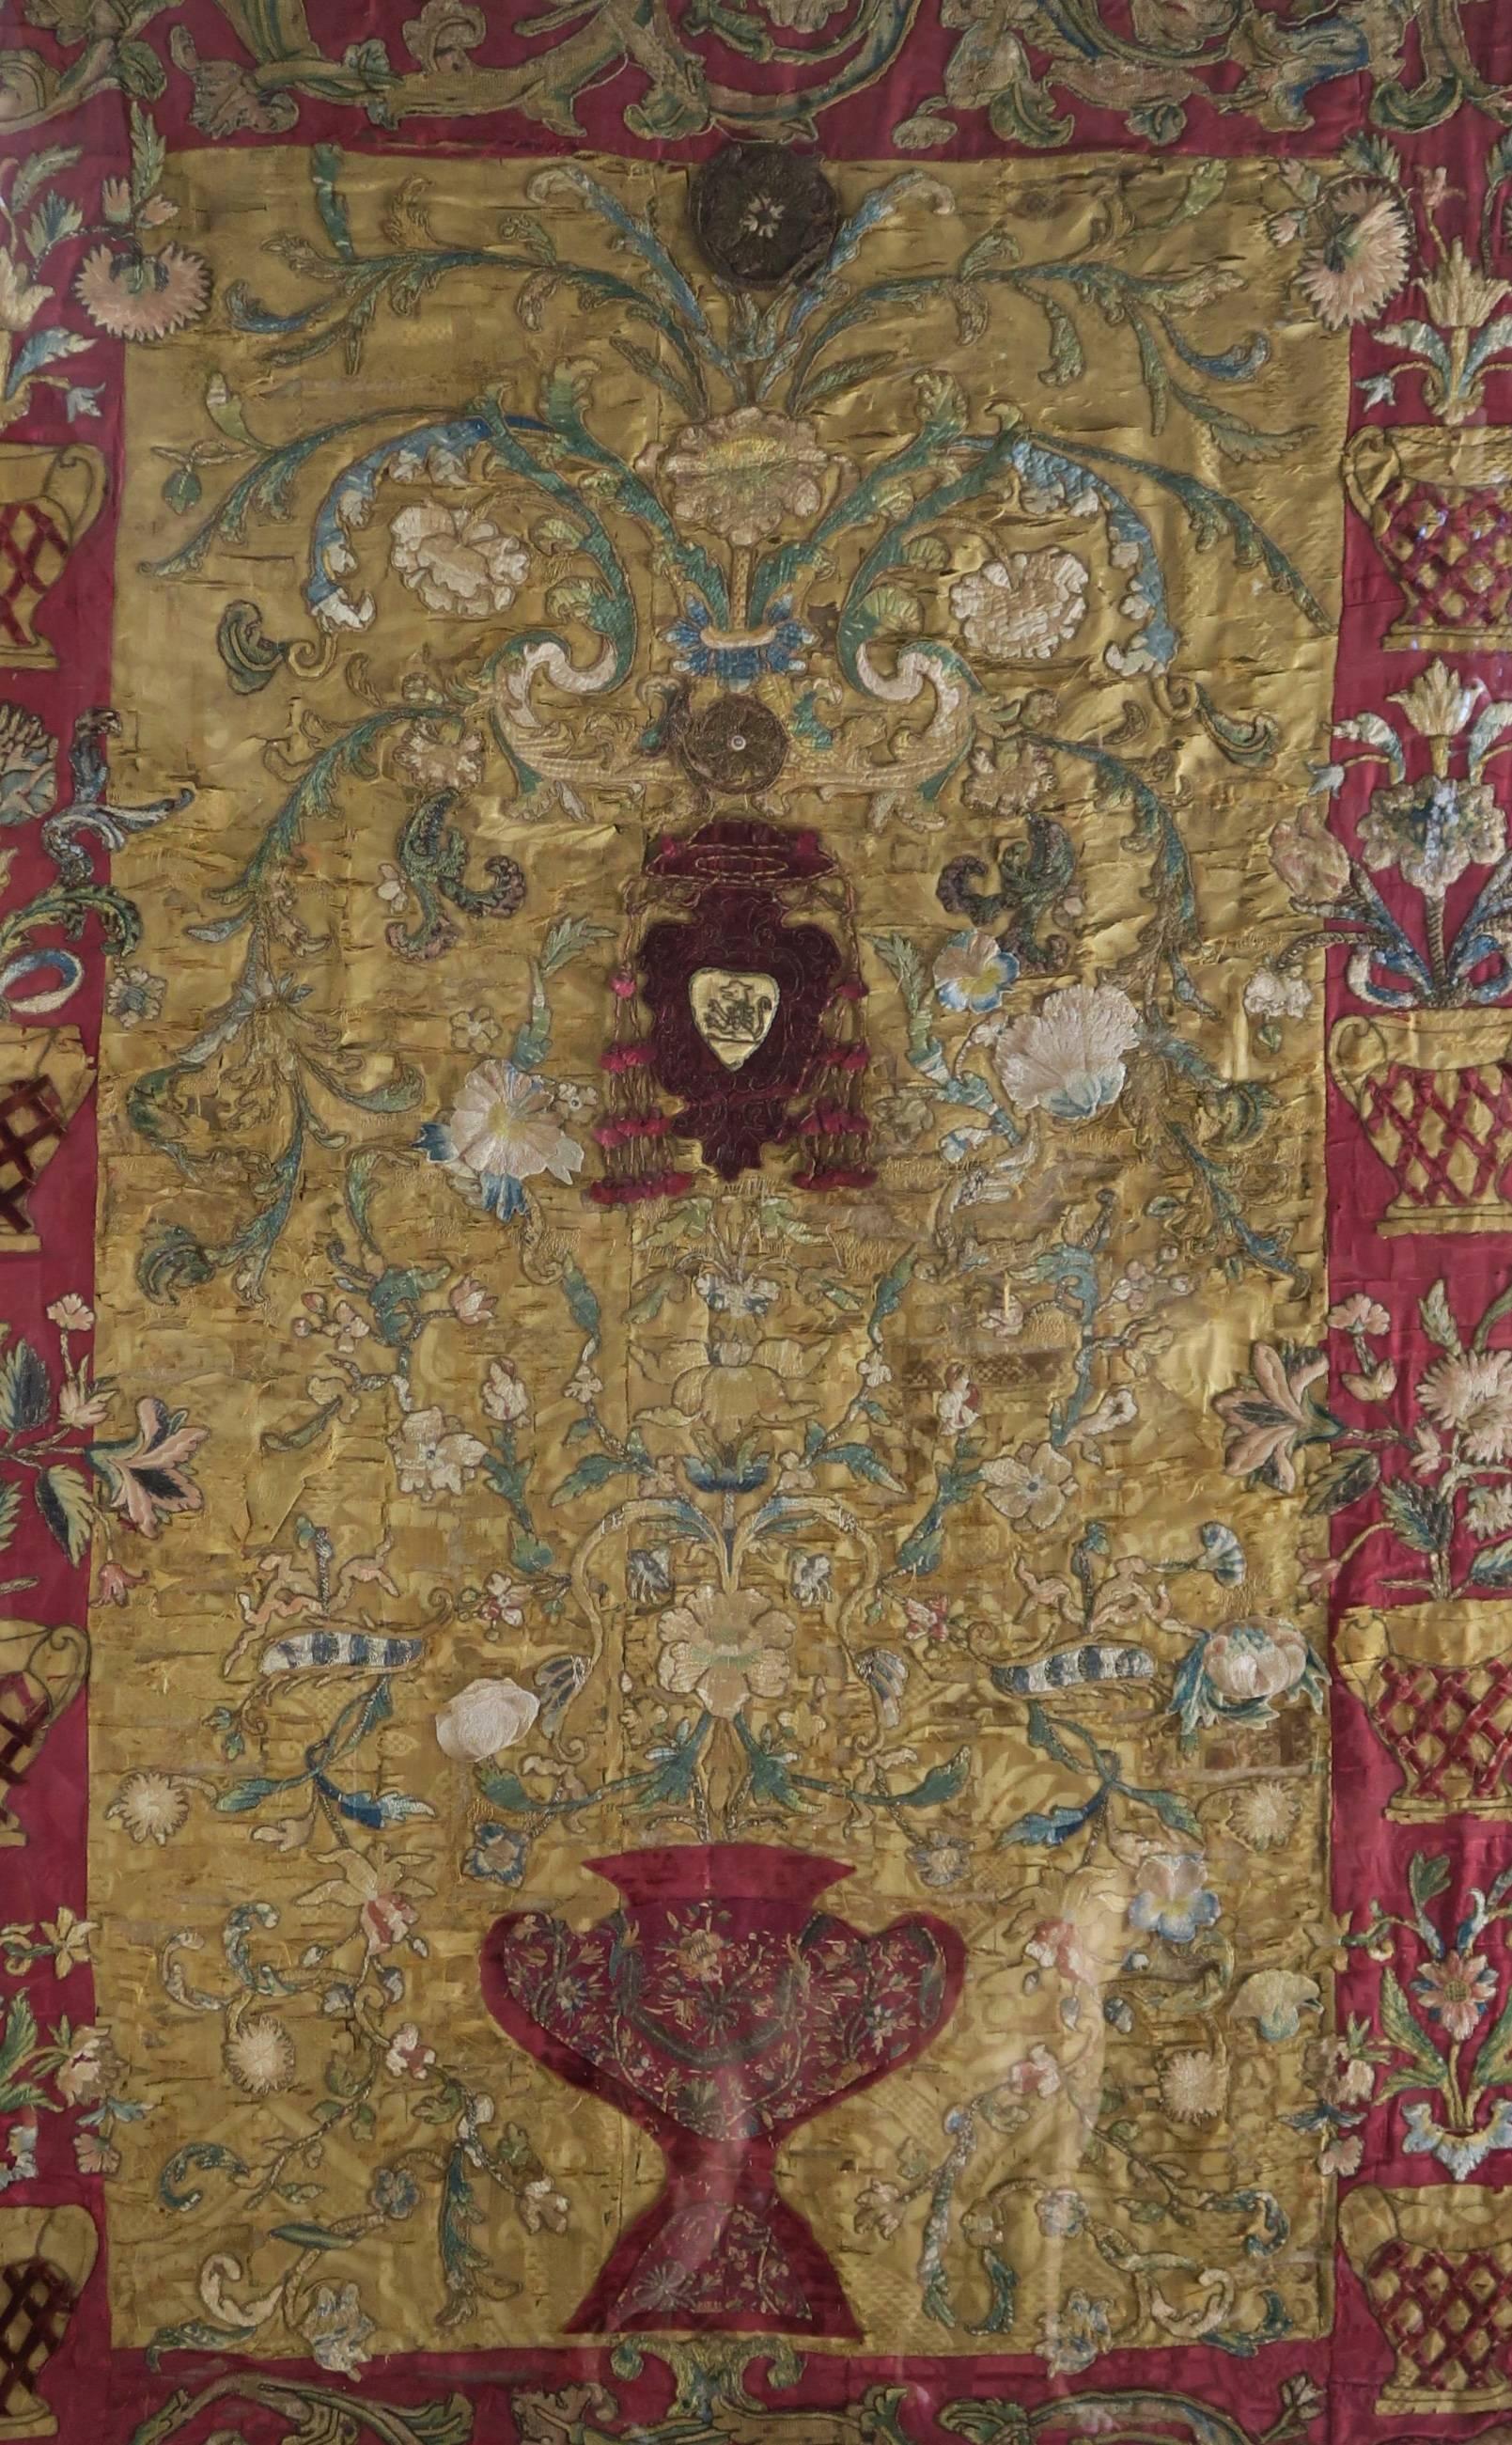 17th century framed Italian silk, metallic threads and velvet embroidered and appliqued textile in rich colors of red and gold with touches of aqua, pink, blue, rust, green and cream. There is also antique needlework in areas of the border. This